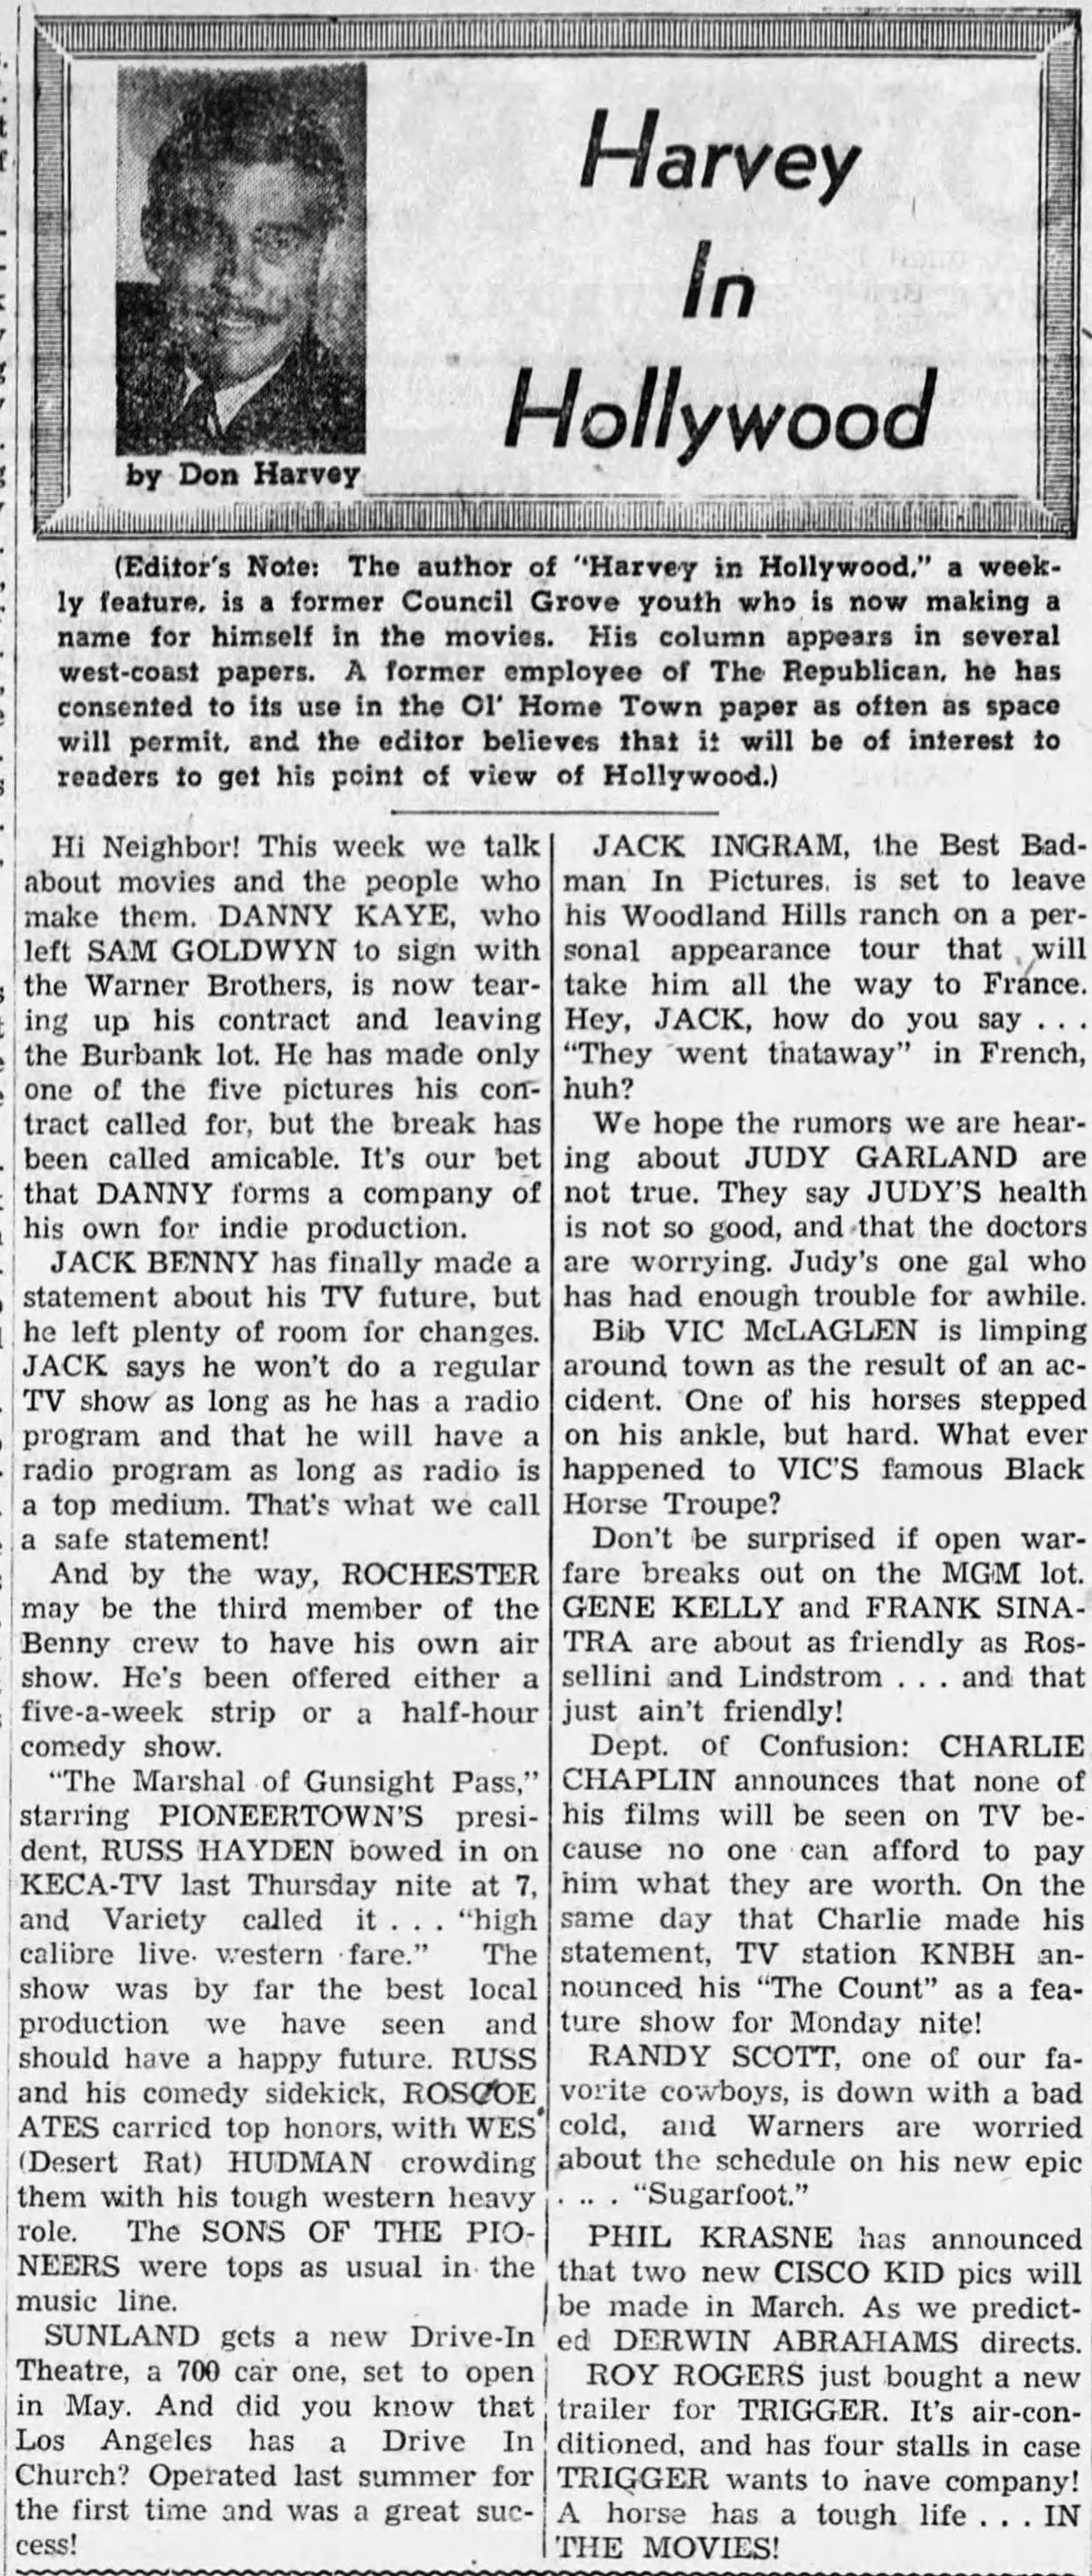 Harvey in Hollywood Feb. 22, 1950 article clipping